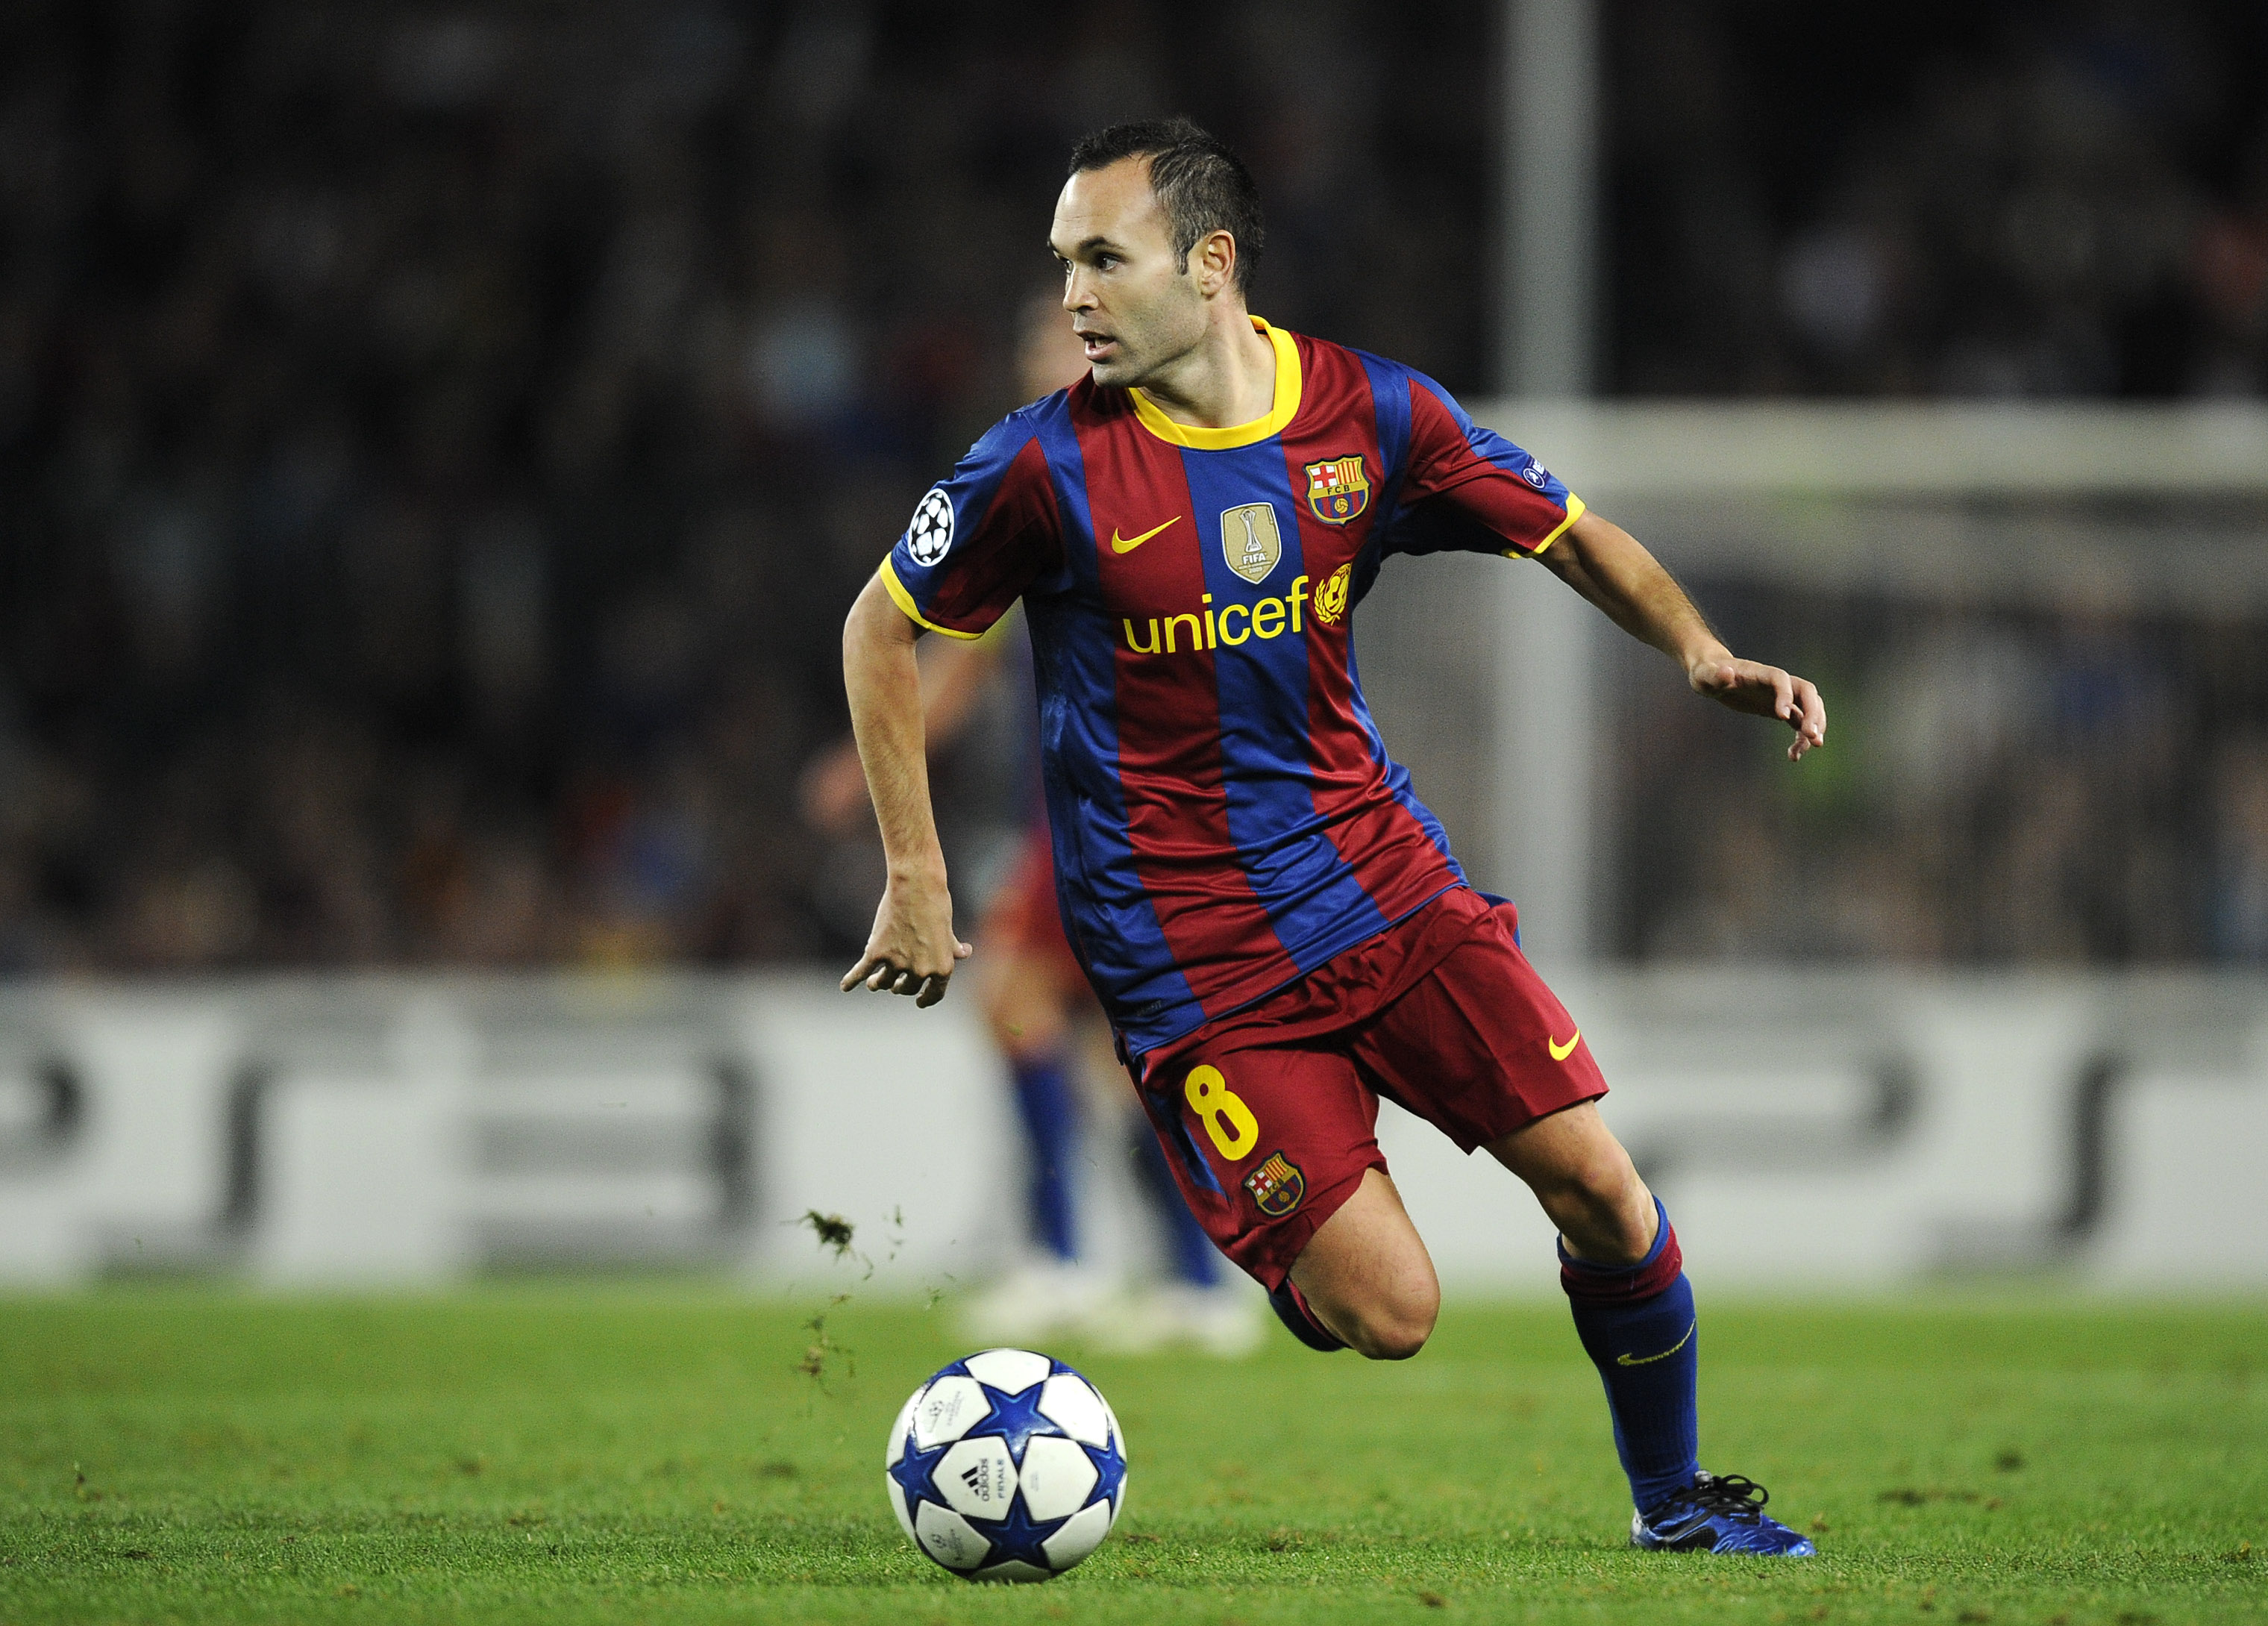 BARCELONA, SPAIN - OCTOBER 20:  Andres Iniesta of Barcelona runs with ball during the UEFA Champions League group D match between Barcelona and FC Copenhagen at the Camp nou stadium on October 20, 2010 in Barcelona, Spain. Barcelona won the match 2-0.  (P